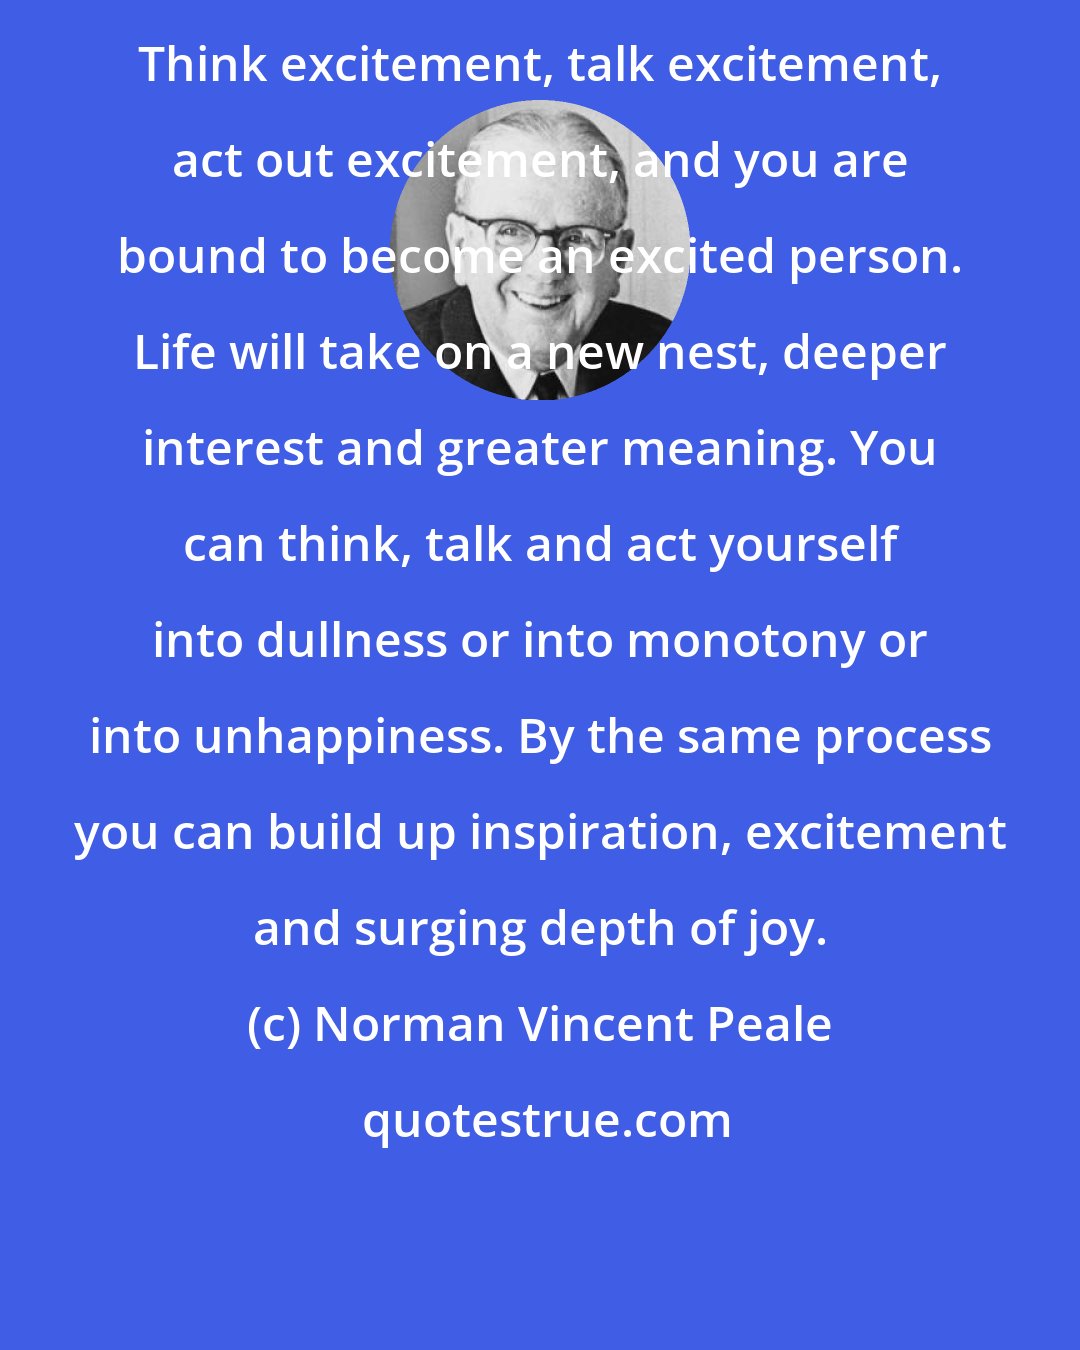 Norman Vincent Peale: Think excitement, talk excitement, act out excitement, and you are bound to become an excited person. Life will take on a new nest, deeper interest and greater meaning. You can think, talk and act yourself into dullness or into monotony or into unhappiness. By the same process you can build up inspiration, excitement and surging depth of joy.